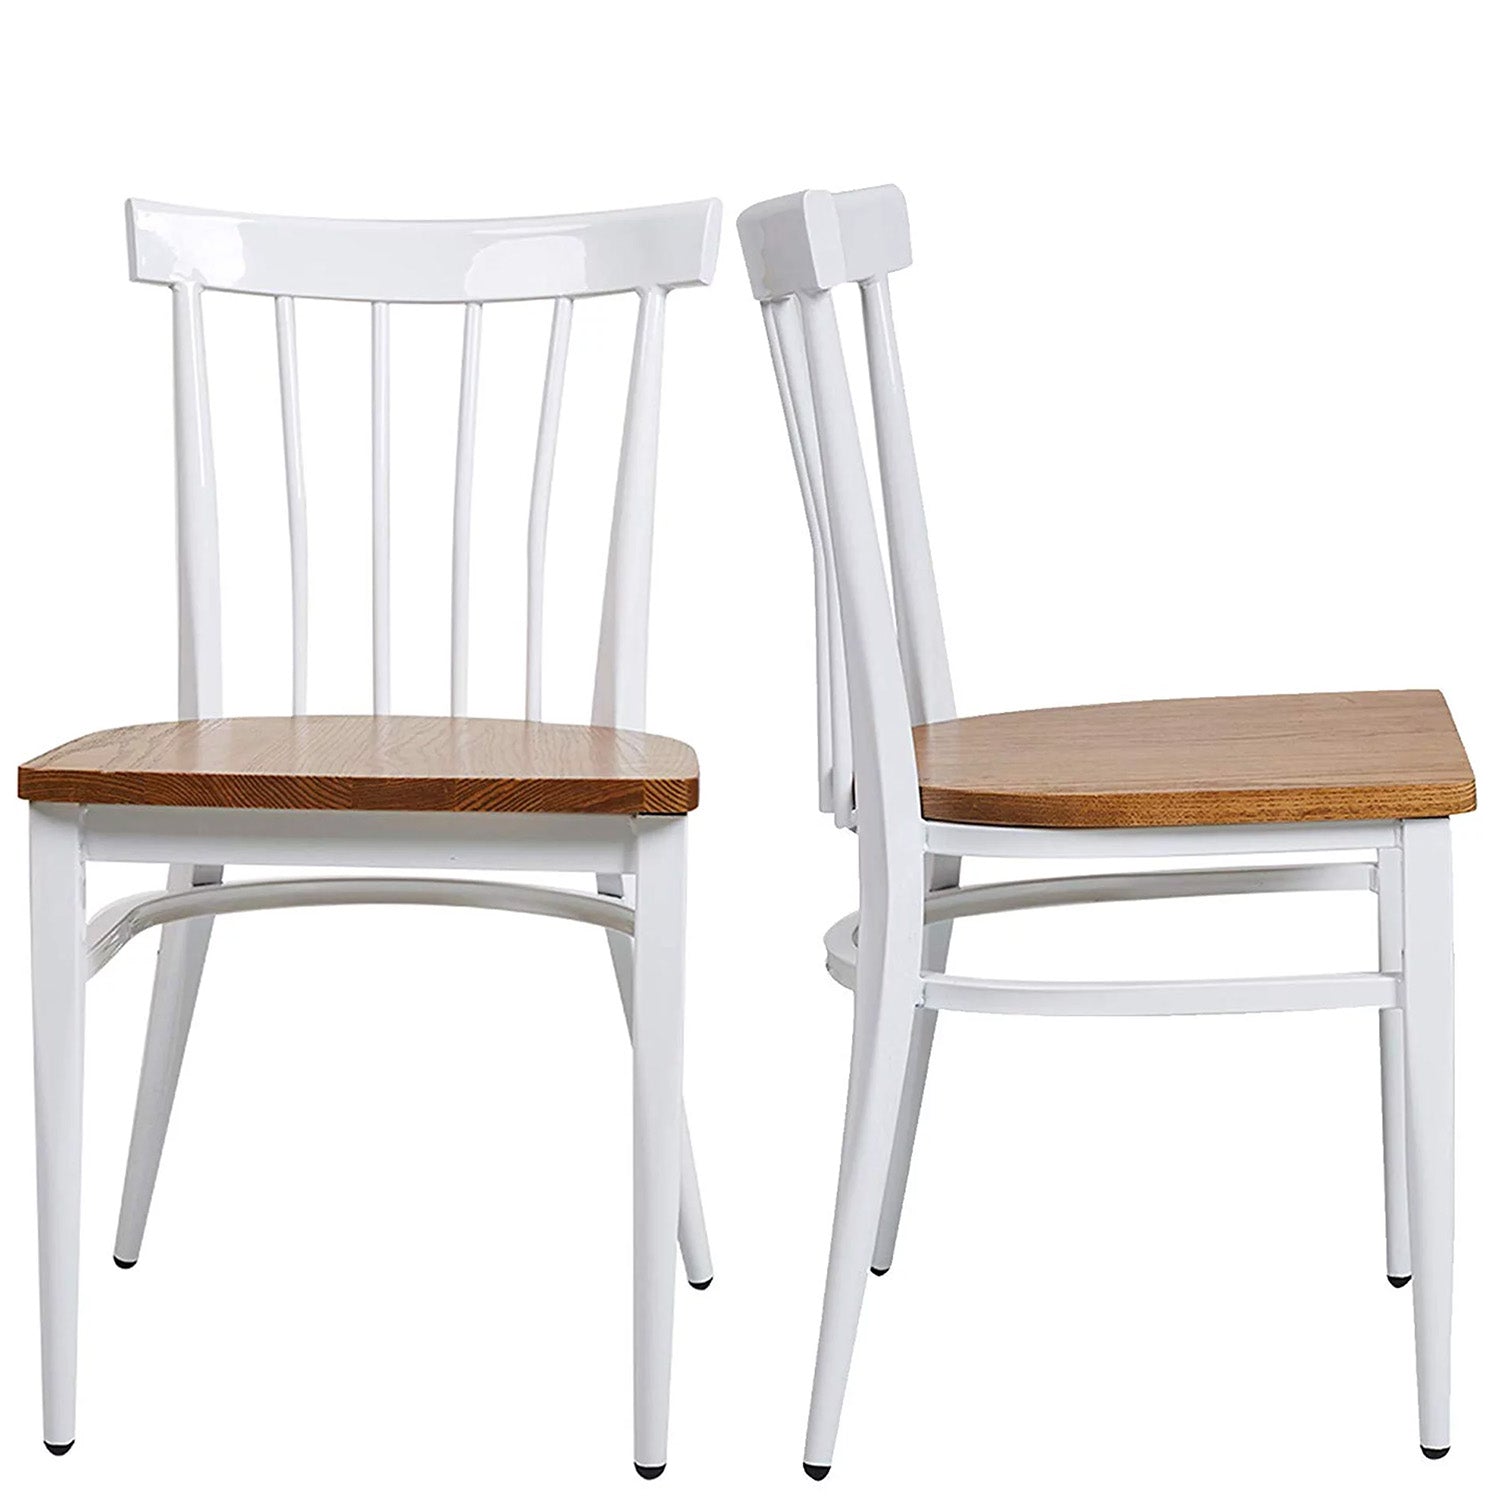 LUCKYERMORE Set of 2 Dining Side Chairs Natural Wood Seat Iron Frame Kitchen Restaurant Chairs, Comb Back White